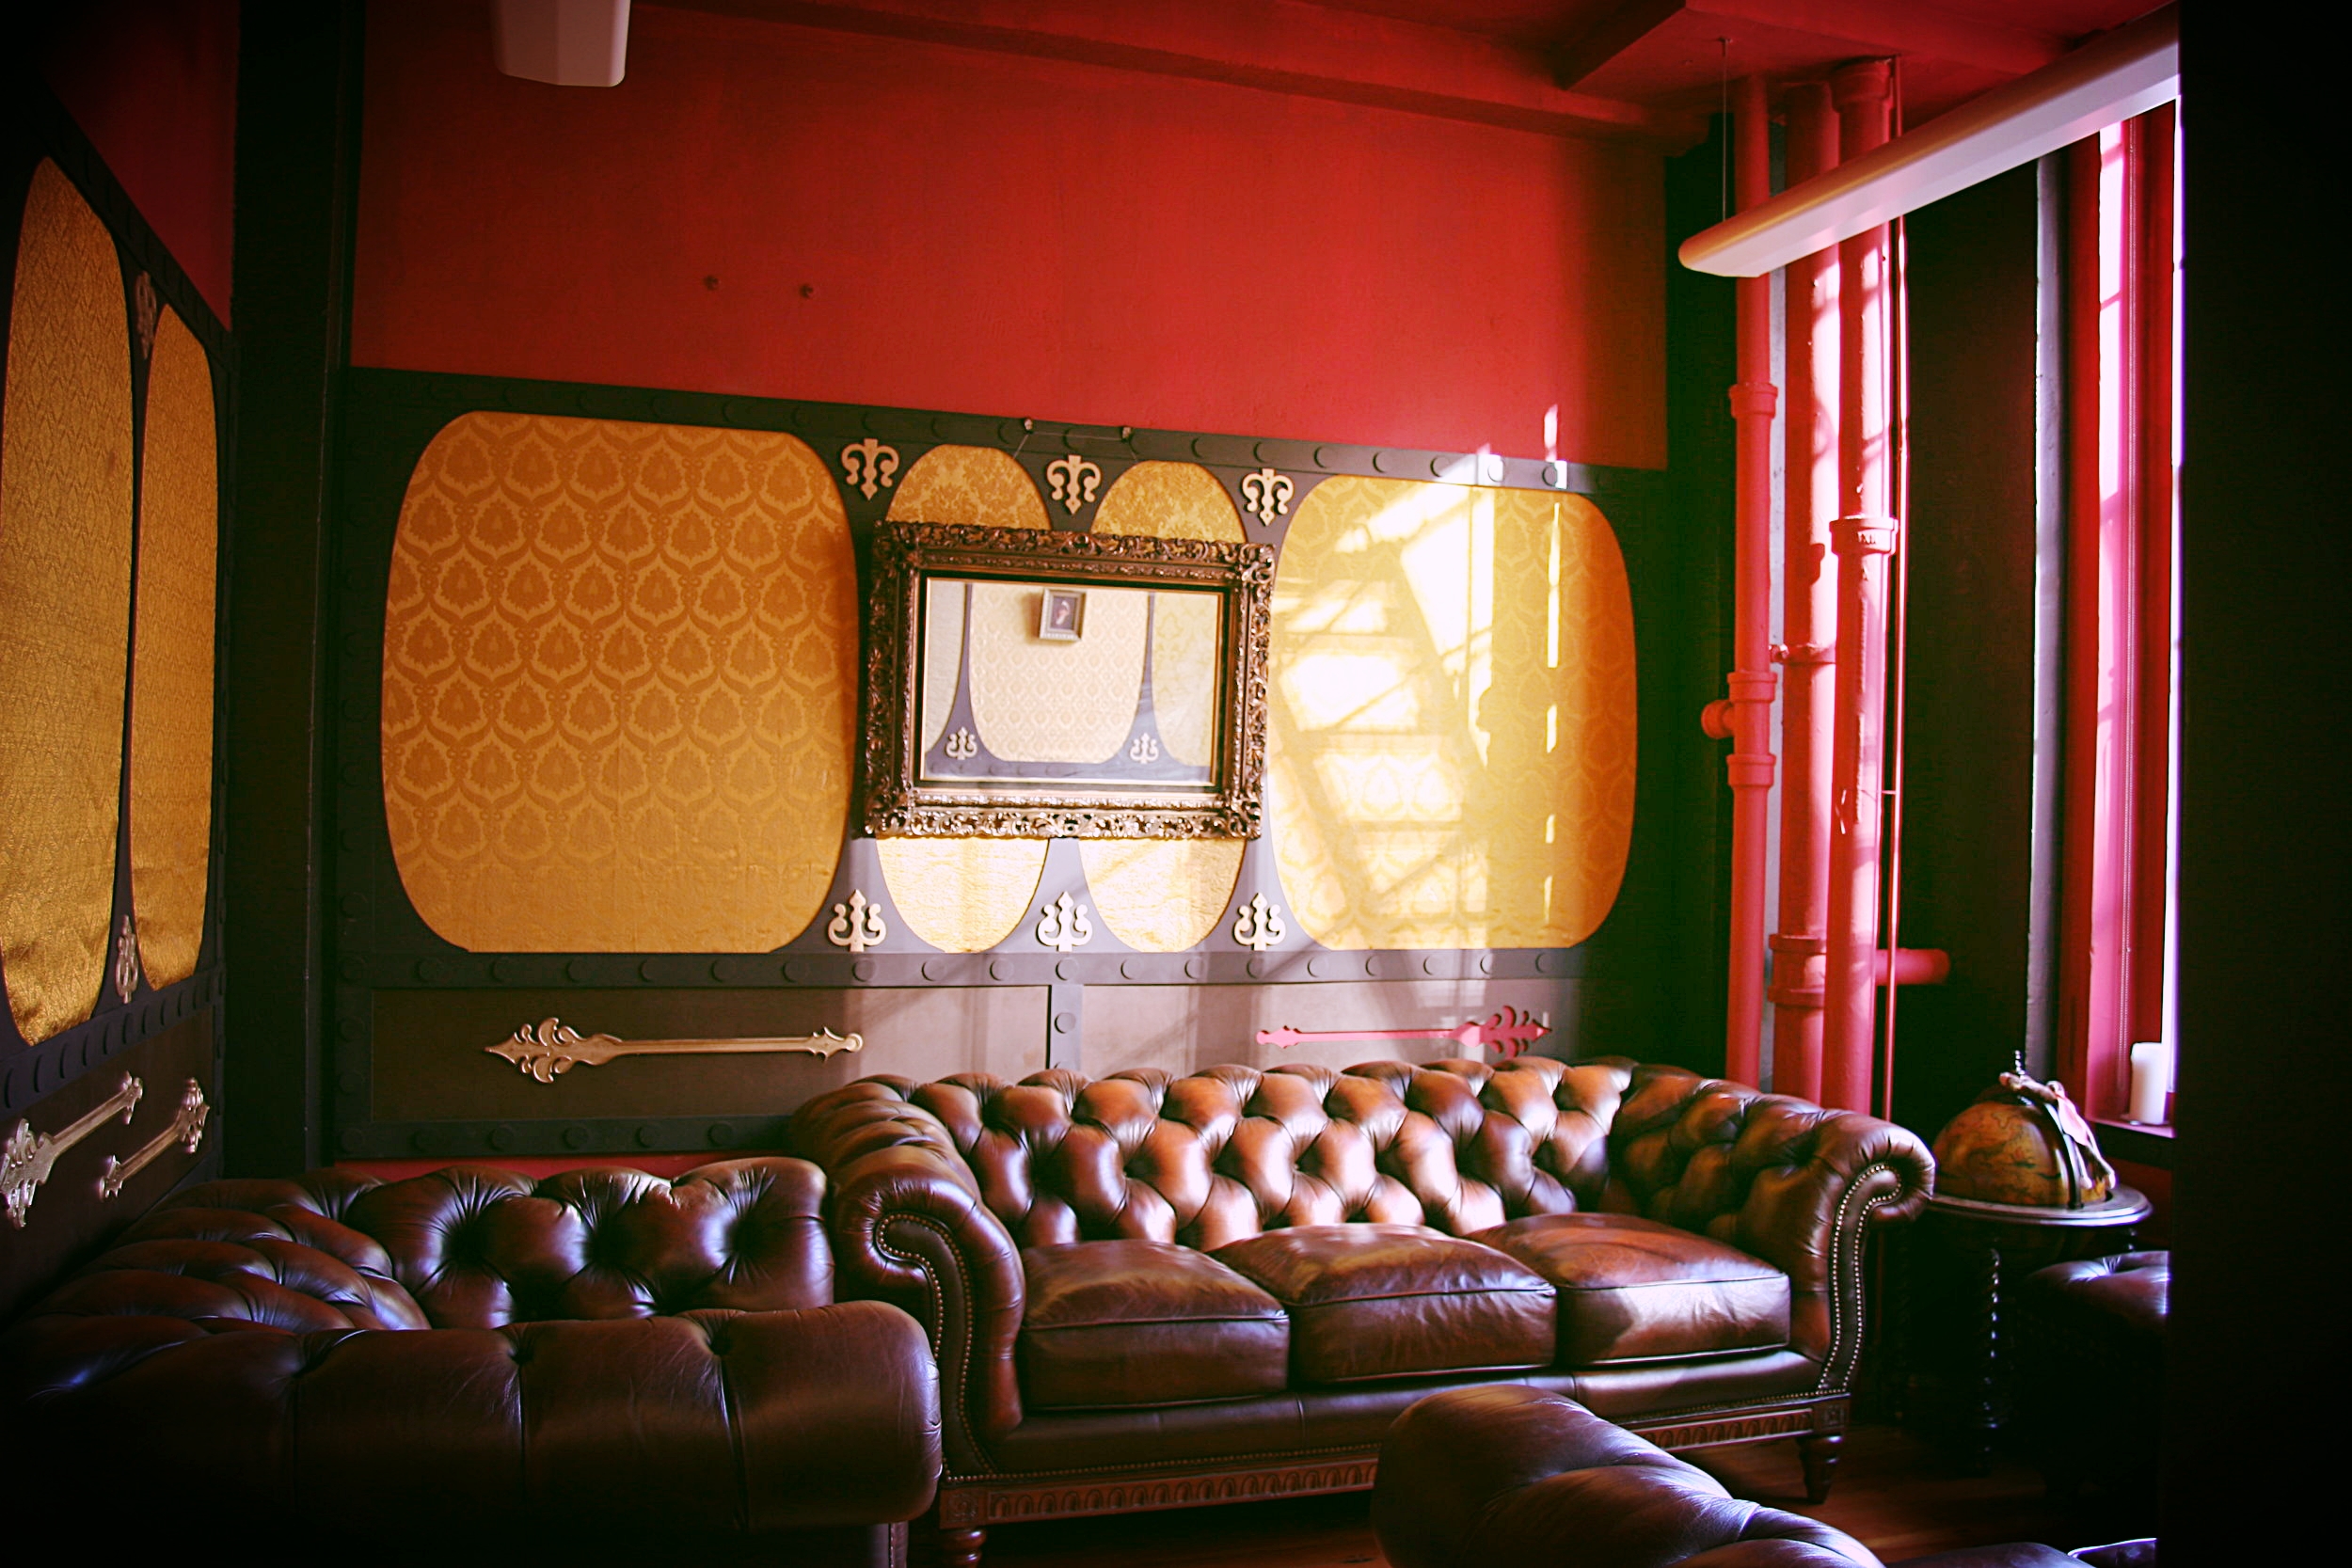  The secret room's furnishings, big,&nbsp;plush leather sofas, were acquired used from a Craigslist poster. 